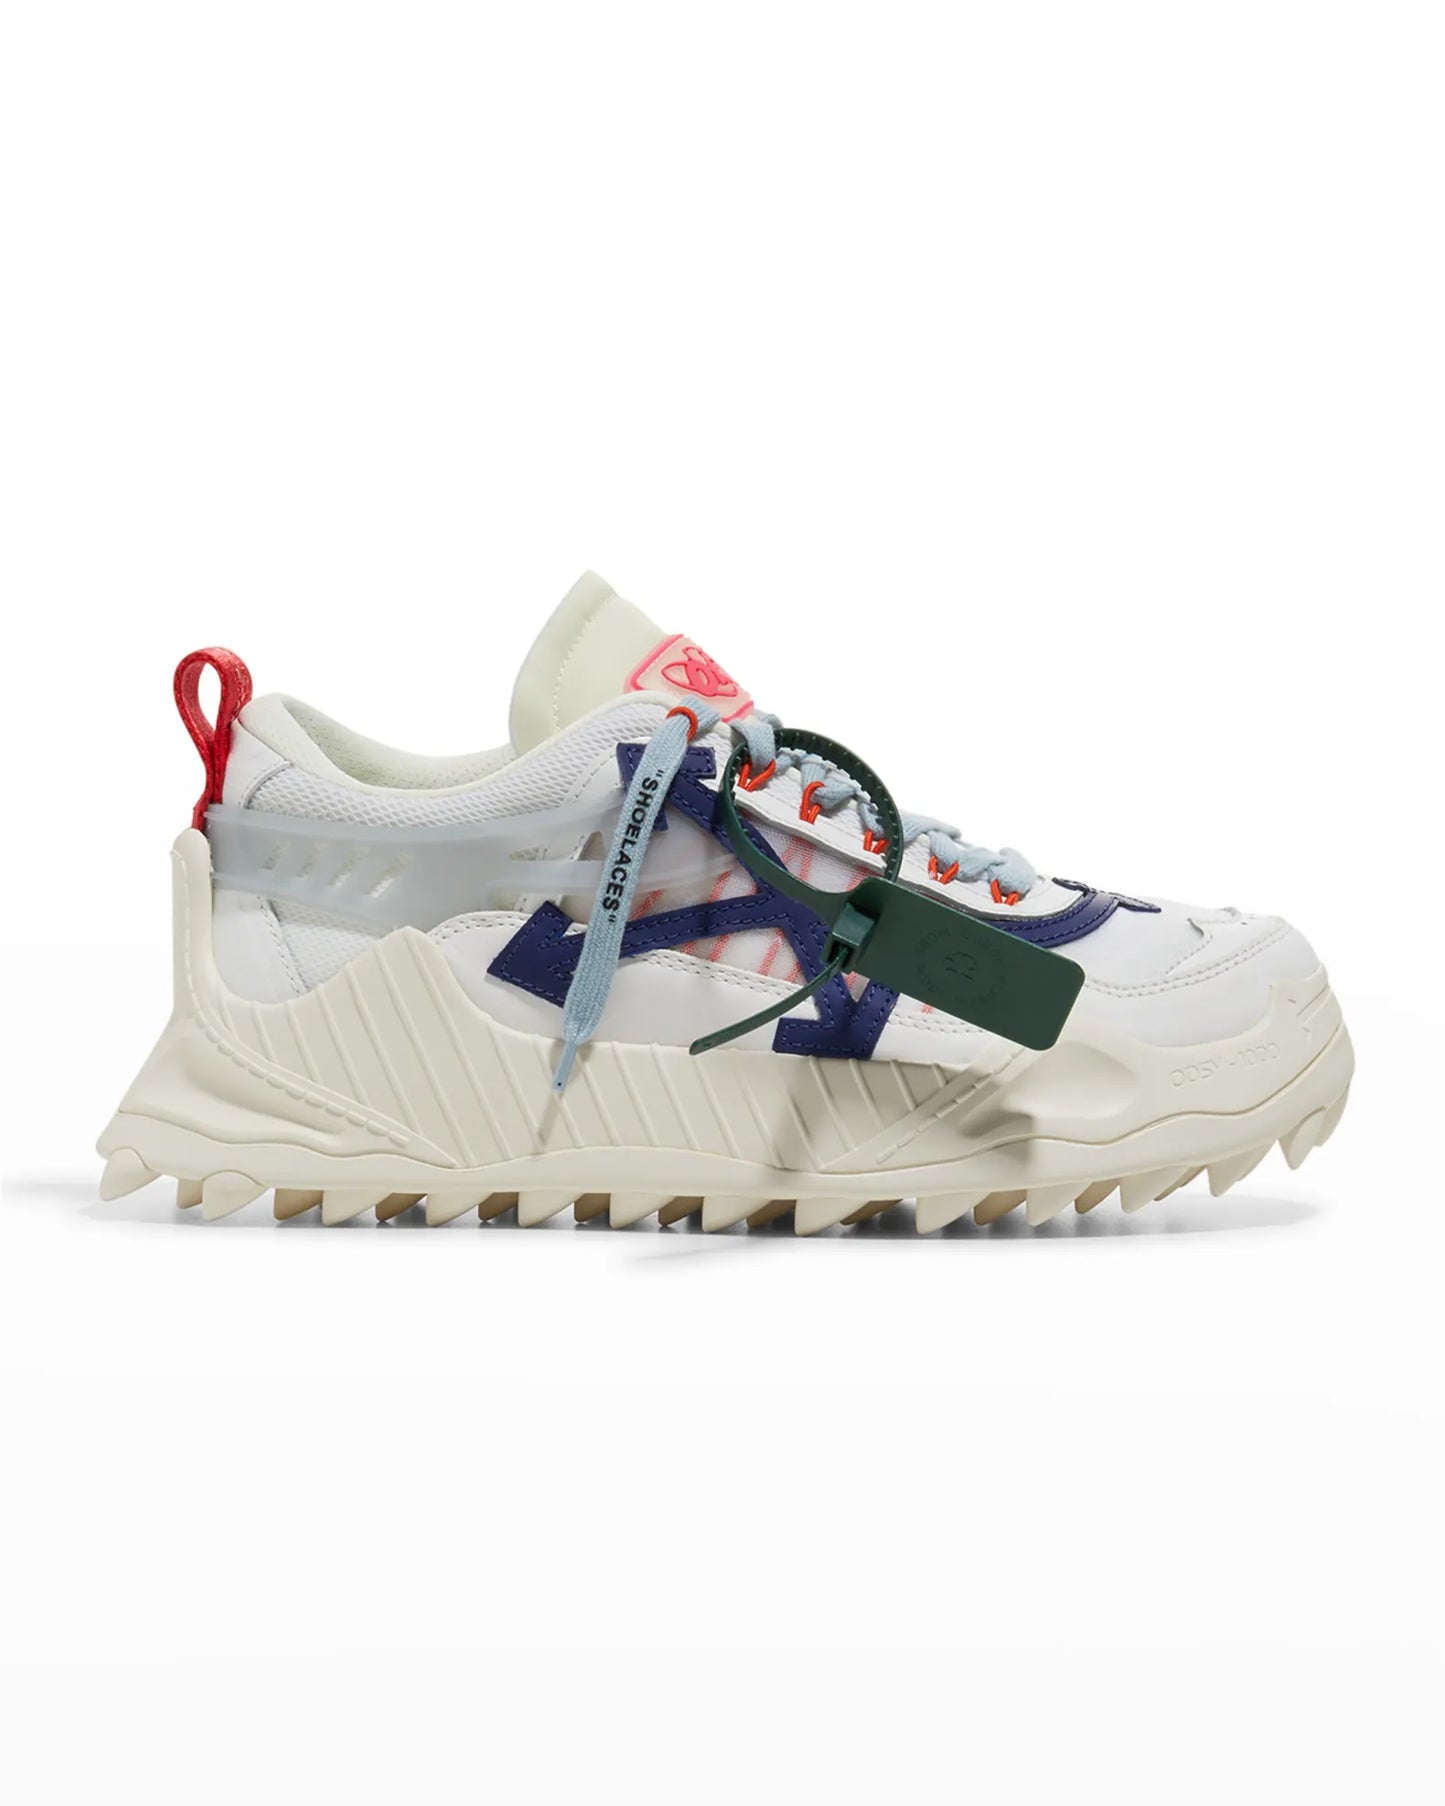 Off-White Odsy-1000 Arrows Logo Mesh Sneakers Side View